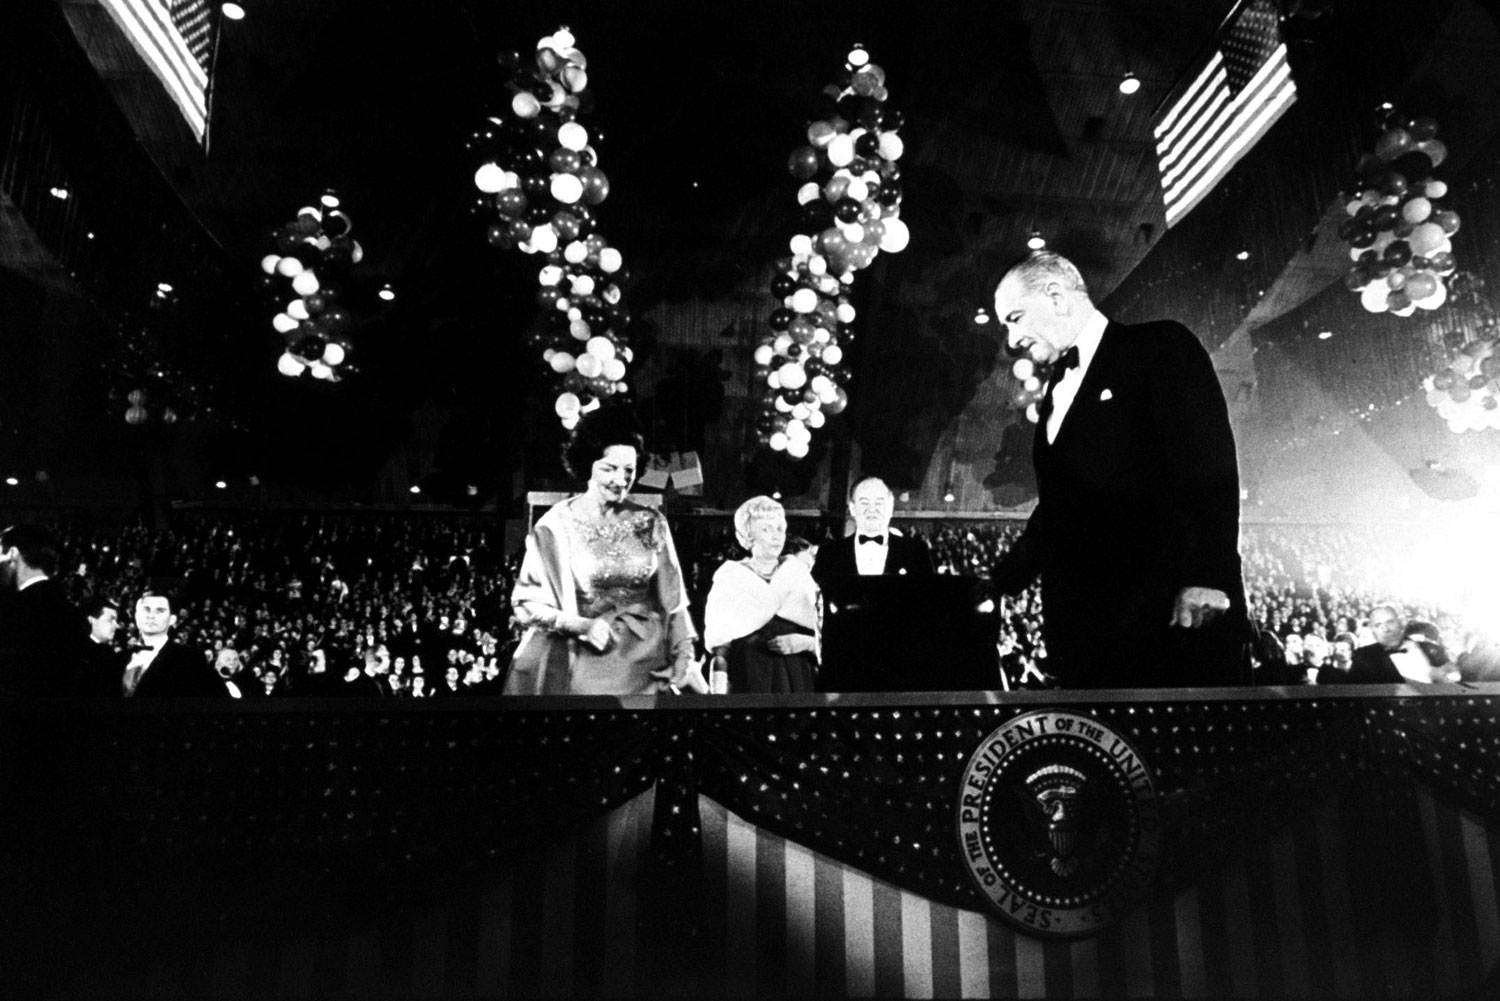 President Lyndon B. Johnson and his wife, Lady Bird, attend inaugural festivities with Vice President Hubert Humphrey (second from right) and his wife, Muriel, in 1965.